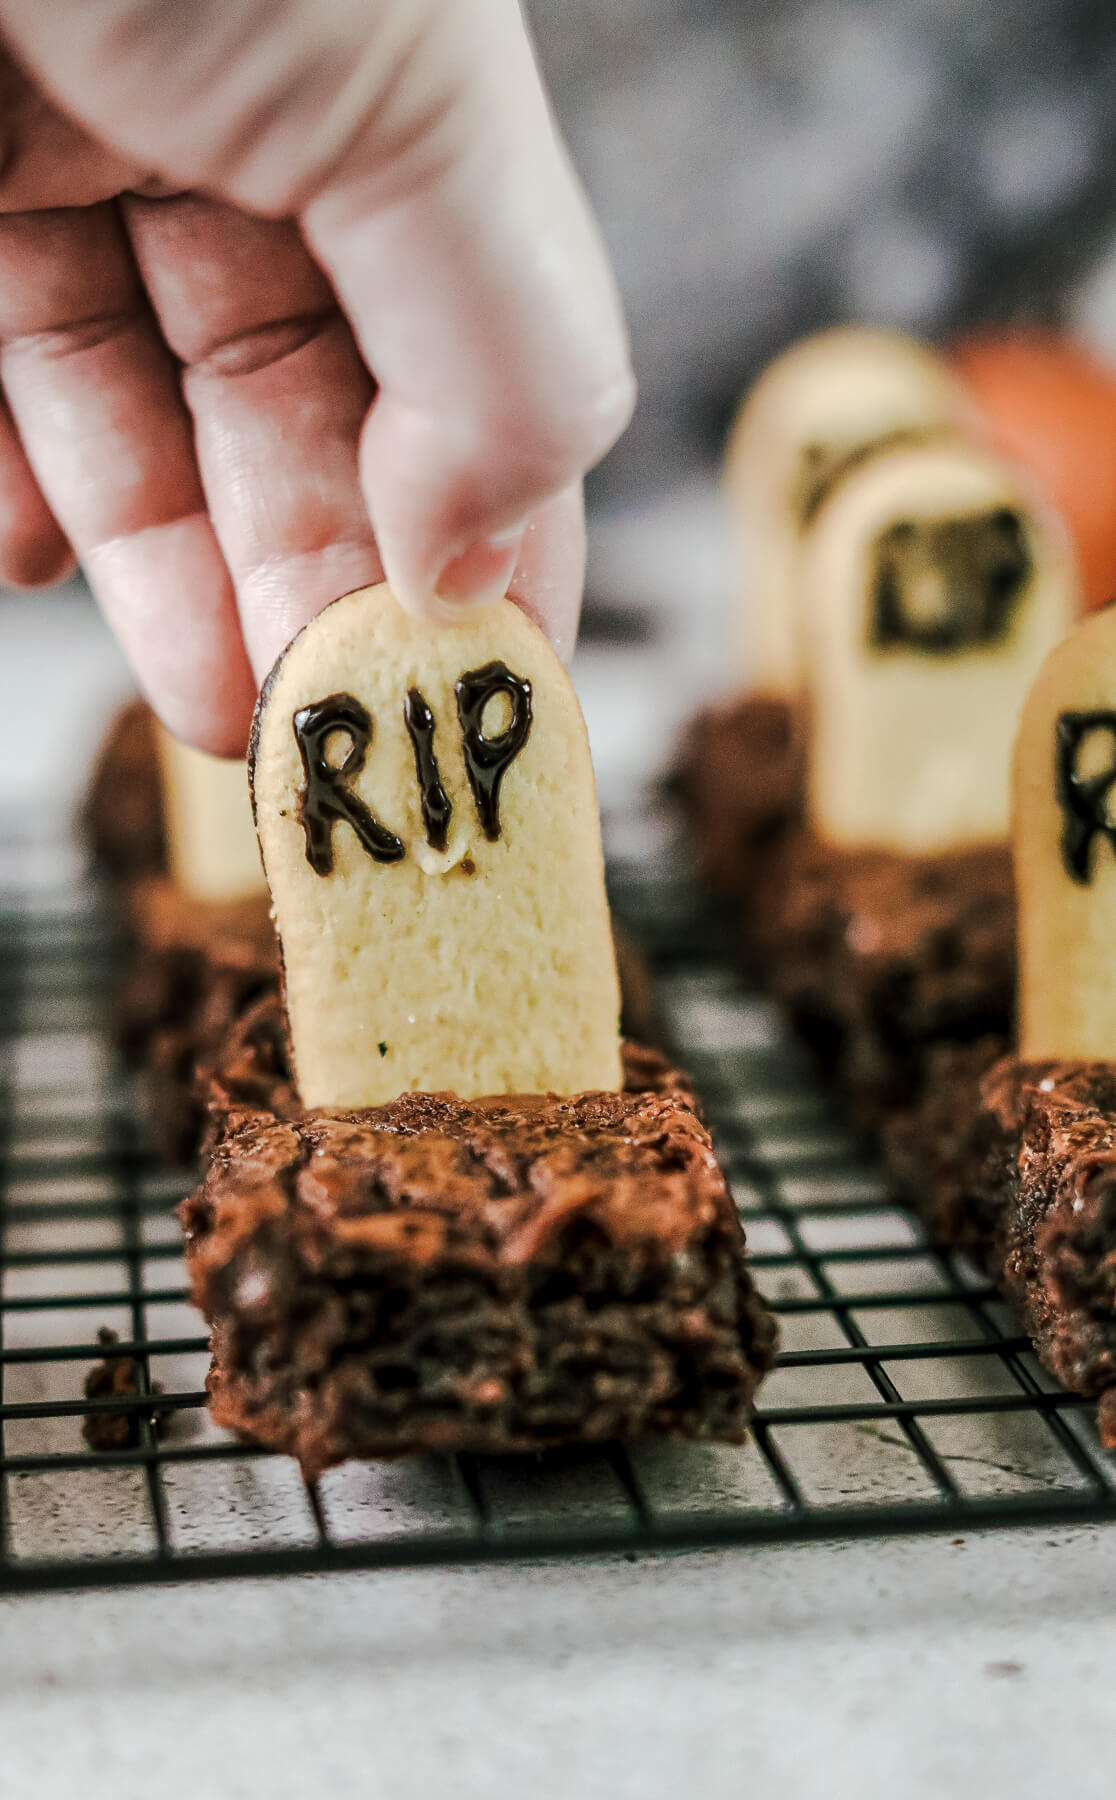 A hand placing a Milano cookie tombstone into a brownie.